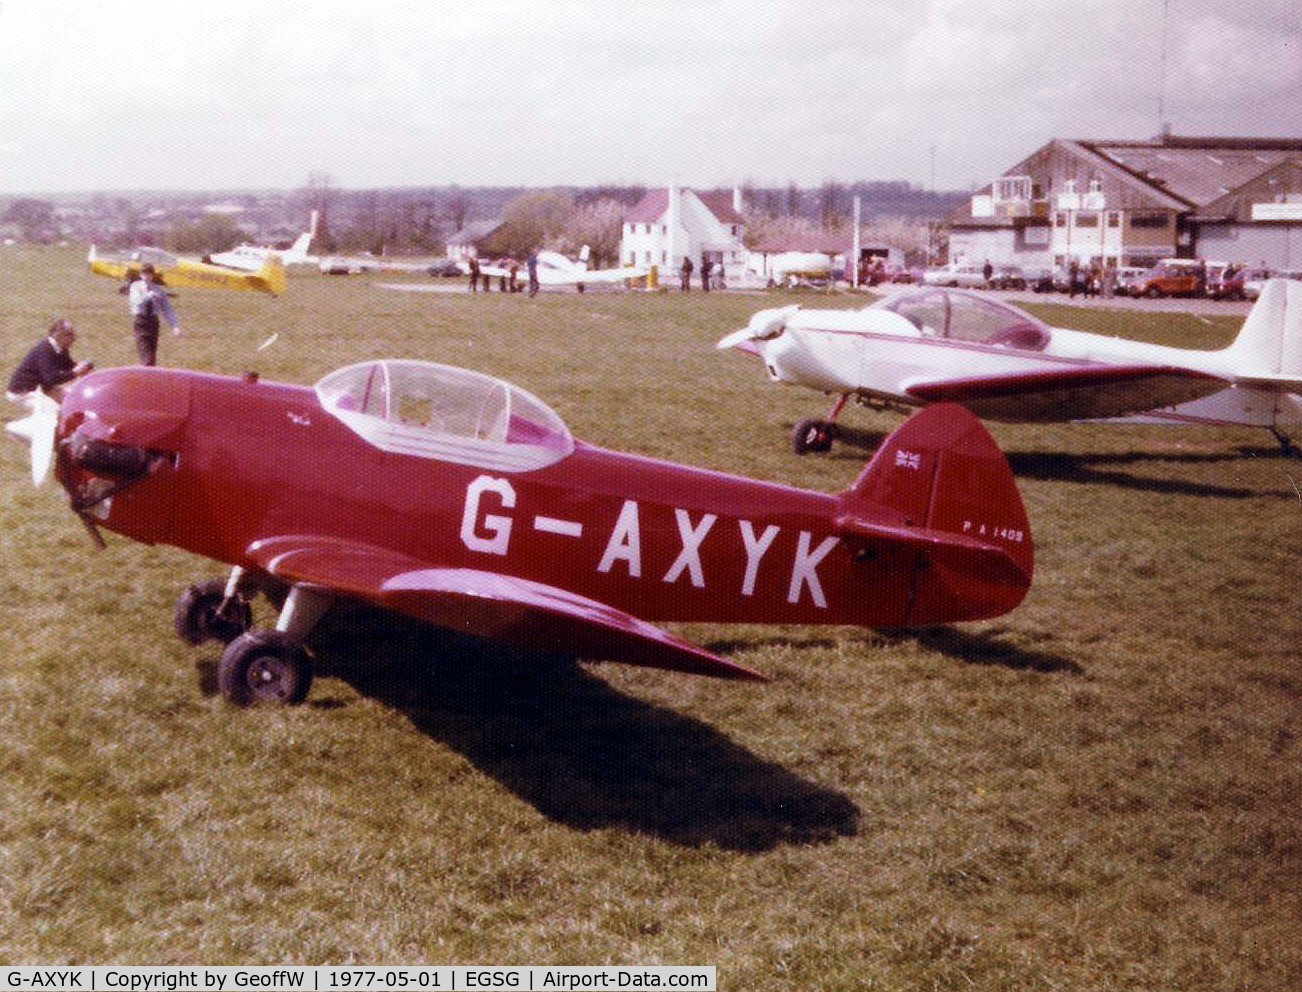 G-AXYK, 1971 Taylor JT-1 Monoplane C/N PFA 1409, Taken at a well attended PFA fly-in at Stapleford in 1977